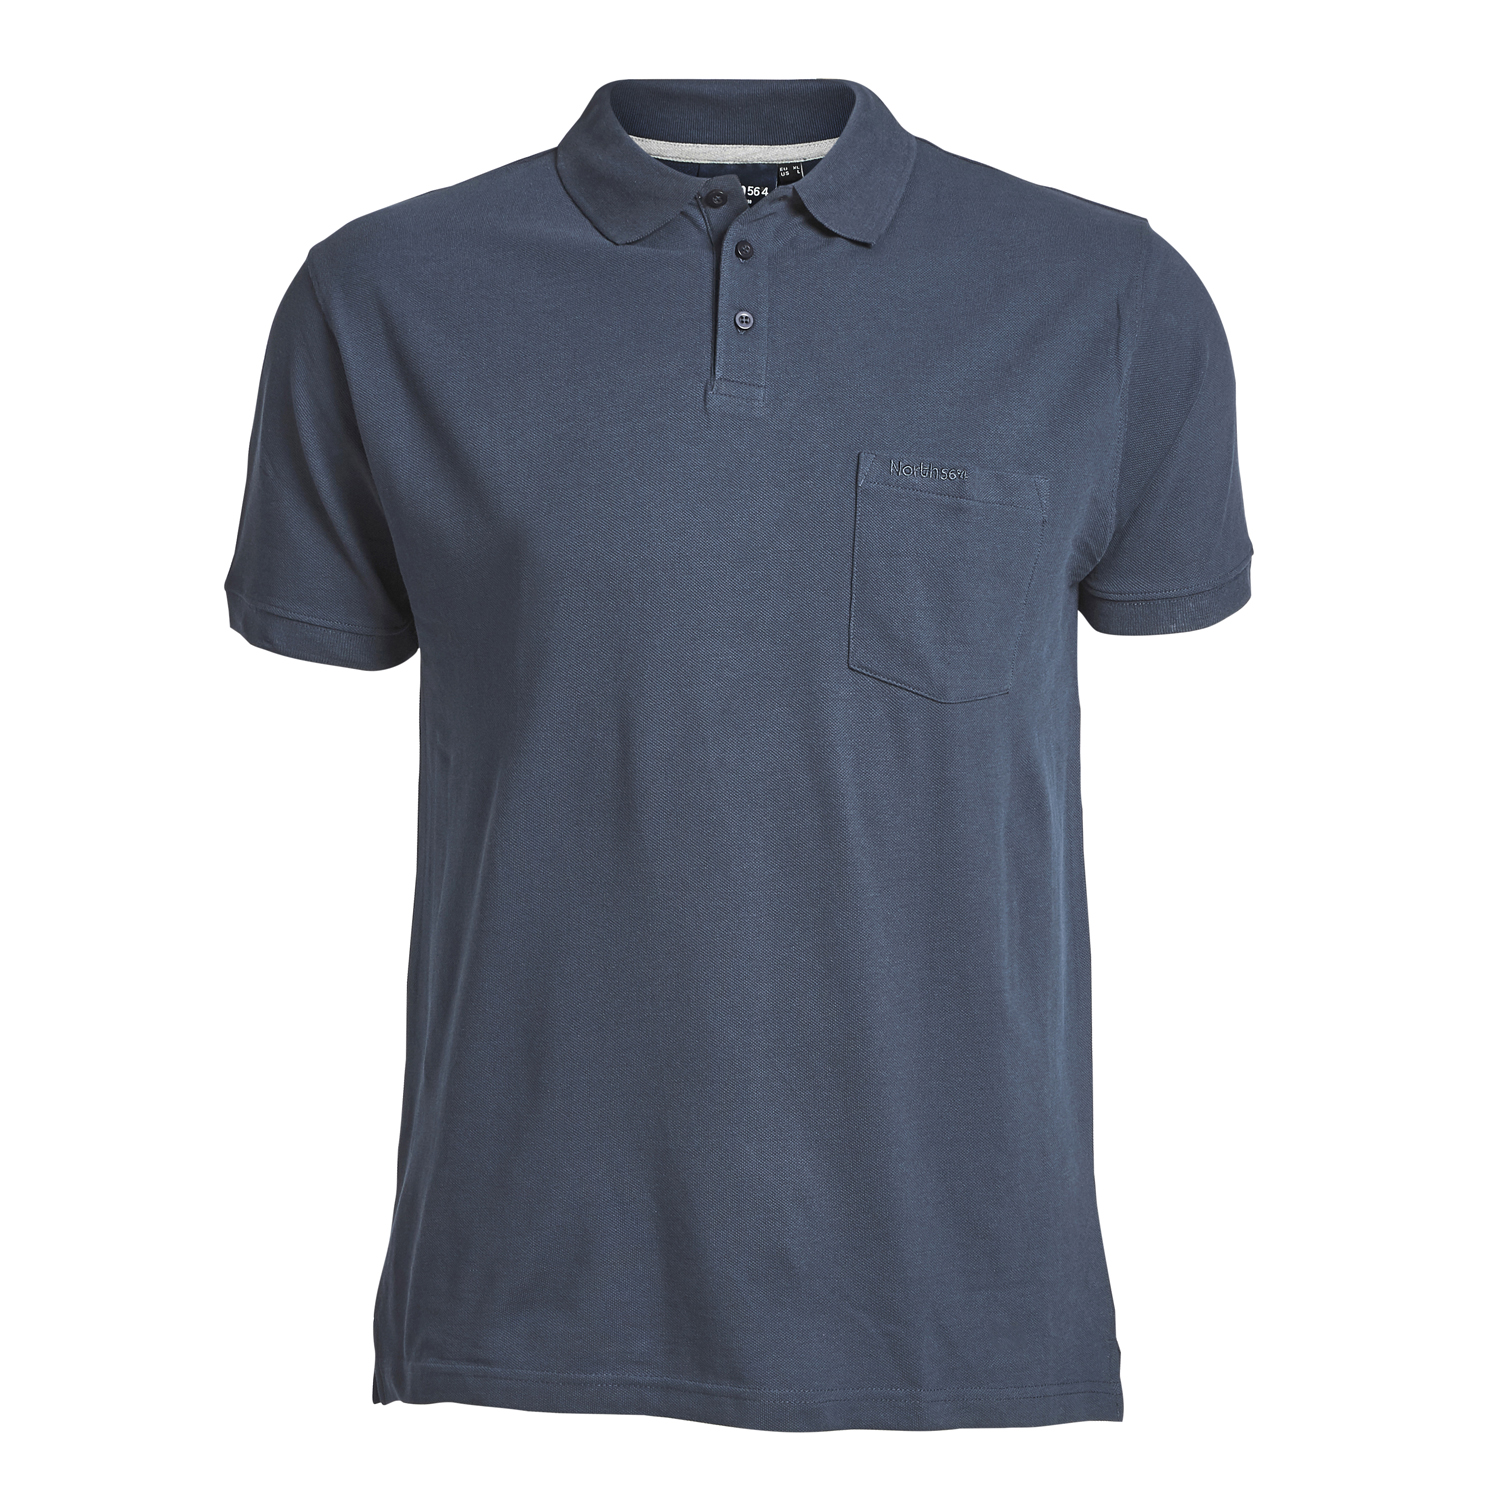 Blue pique poloshirt for men by Greyes/North 56°4 in oversizes up to 8XL